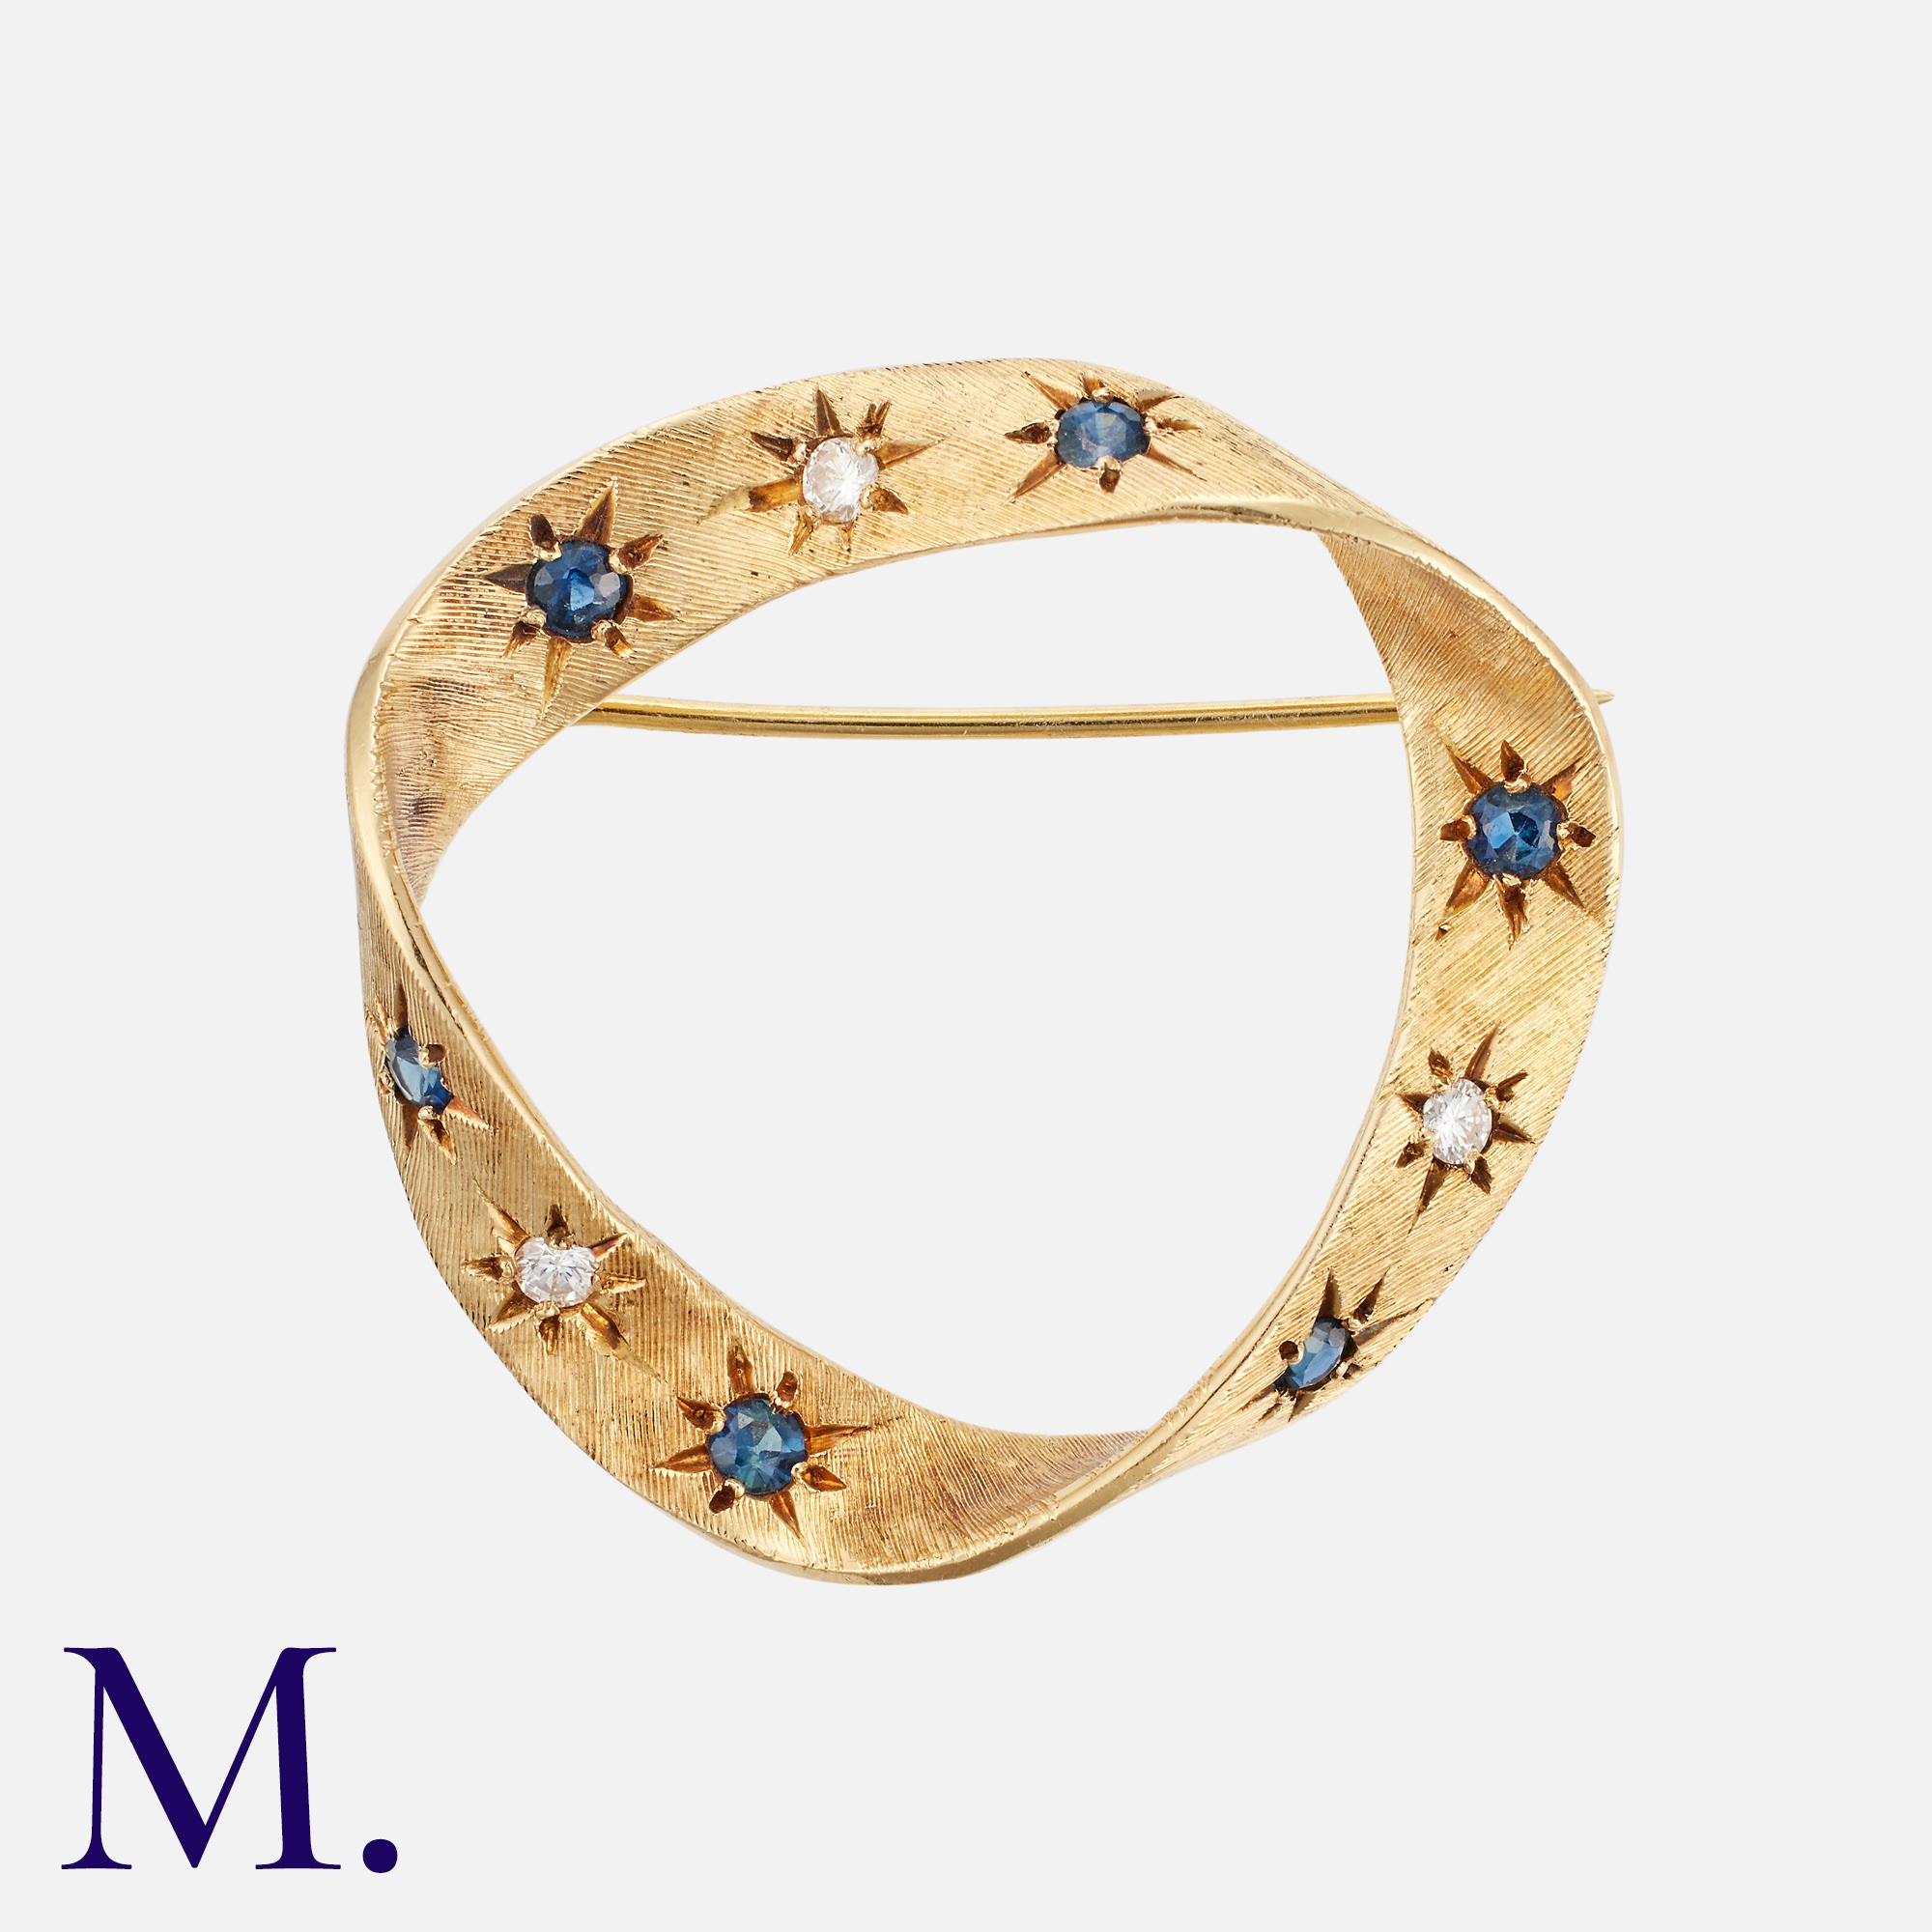 CARTIER. A Sapphire & Diamond Brooch in 18K yellow gold, set with sapphires and diamonds, signed